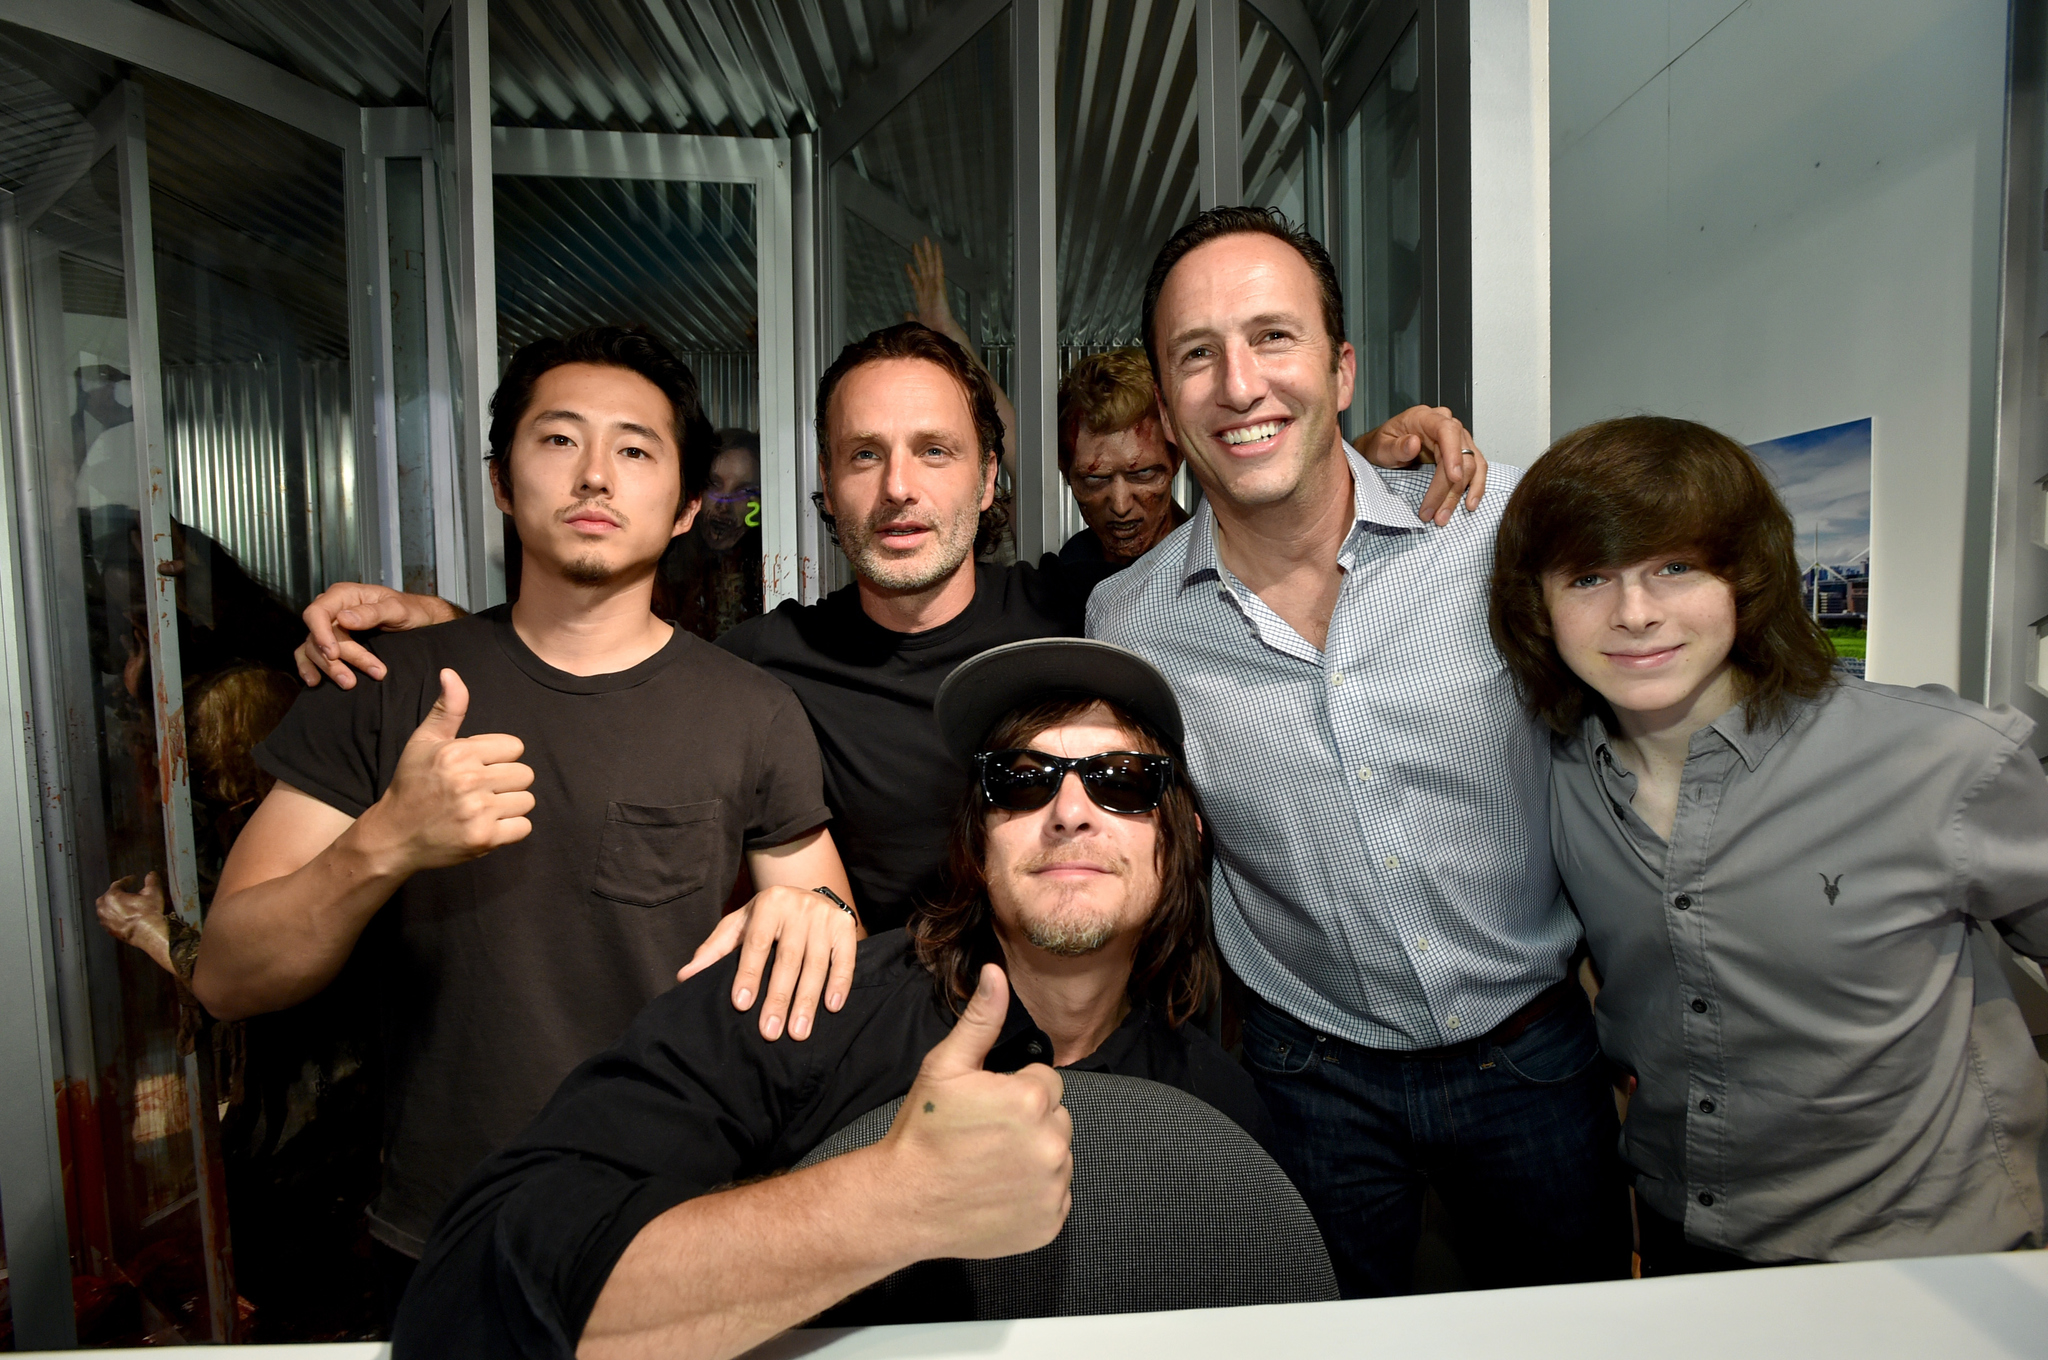 Norman Reedus, Andrew Lincoln, Charlie Collier, Steven Yeun and Chandler Riggs at event of Vaiksciojantys negyveliai (2010)